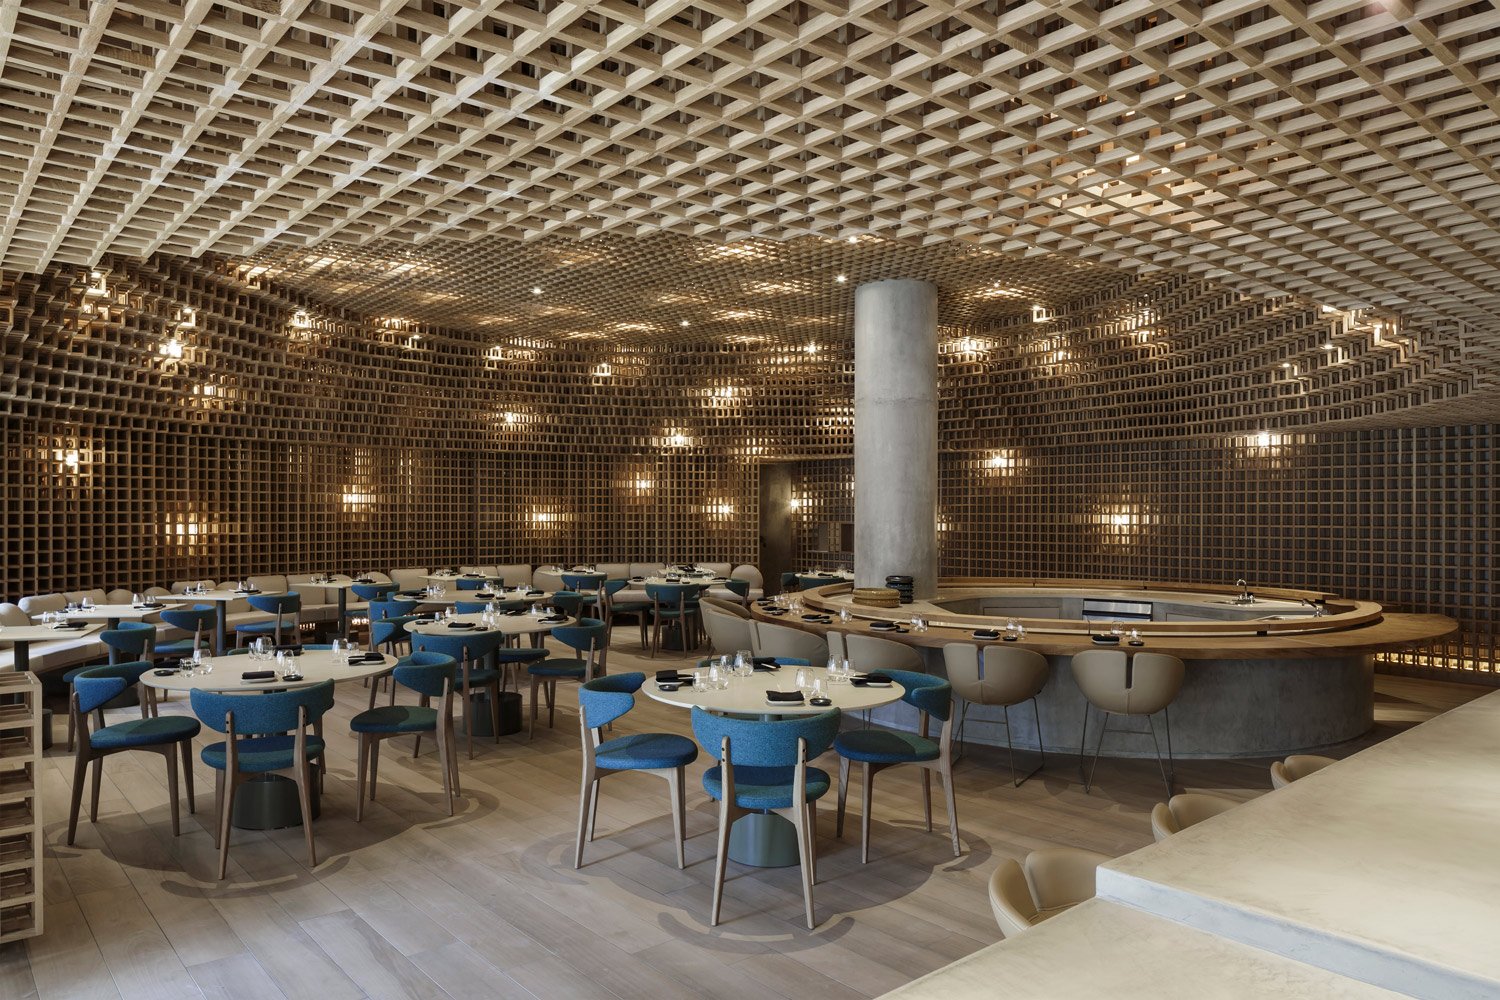 Kosushi Miami offers the complete experience of a vernacular japanese architecture combined with contemporary references. | Filippo Bamberghi